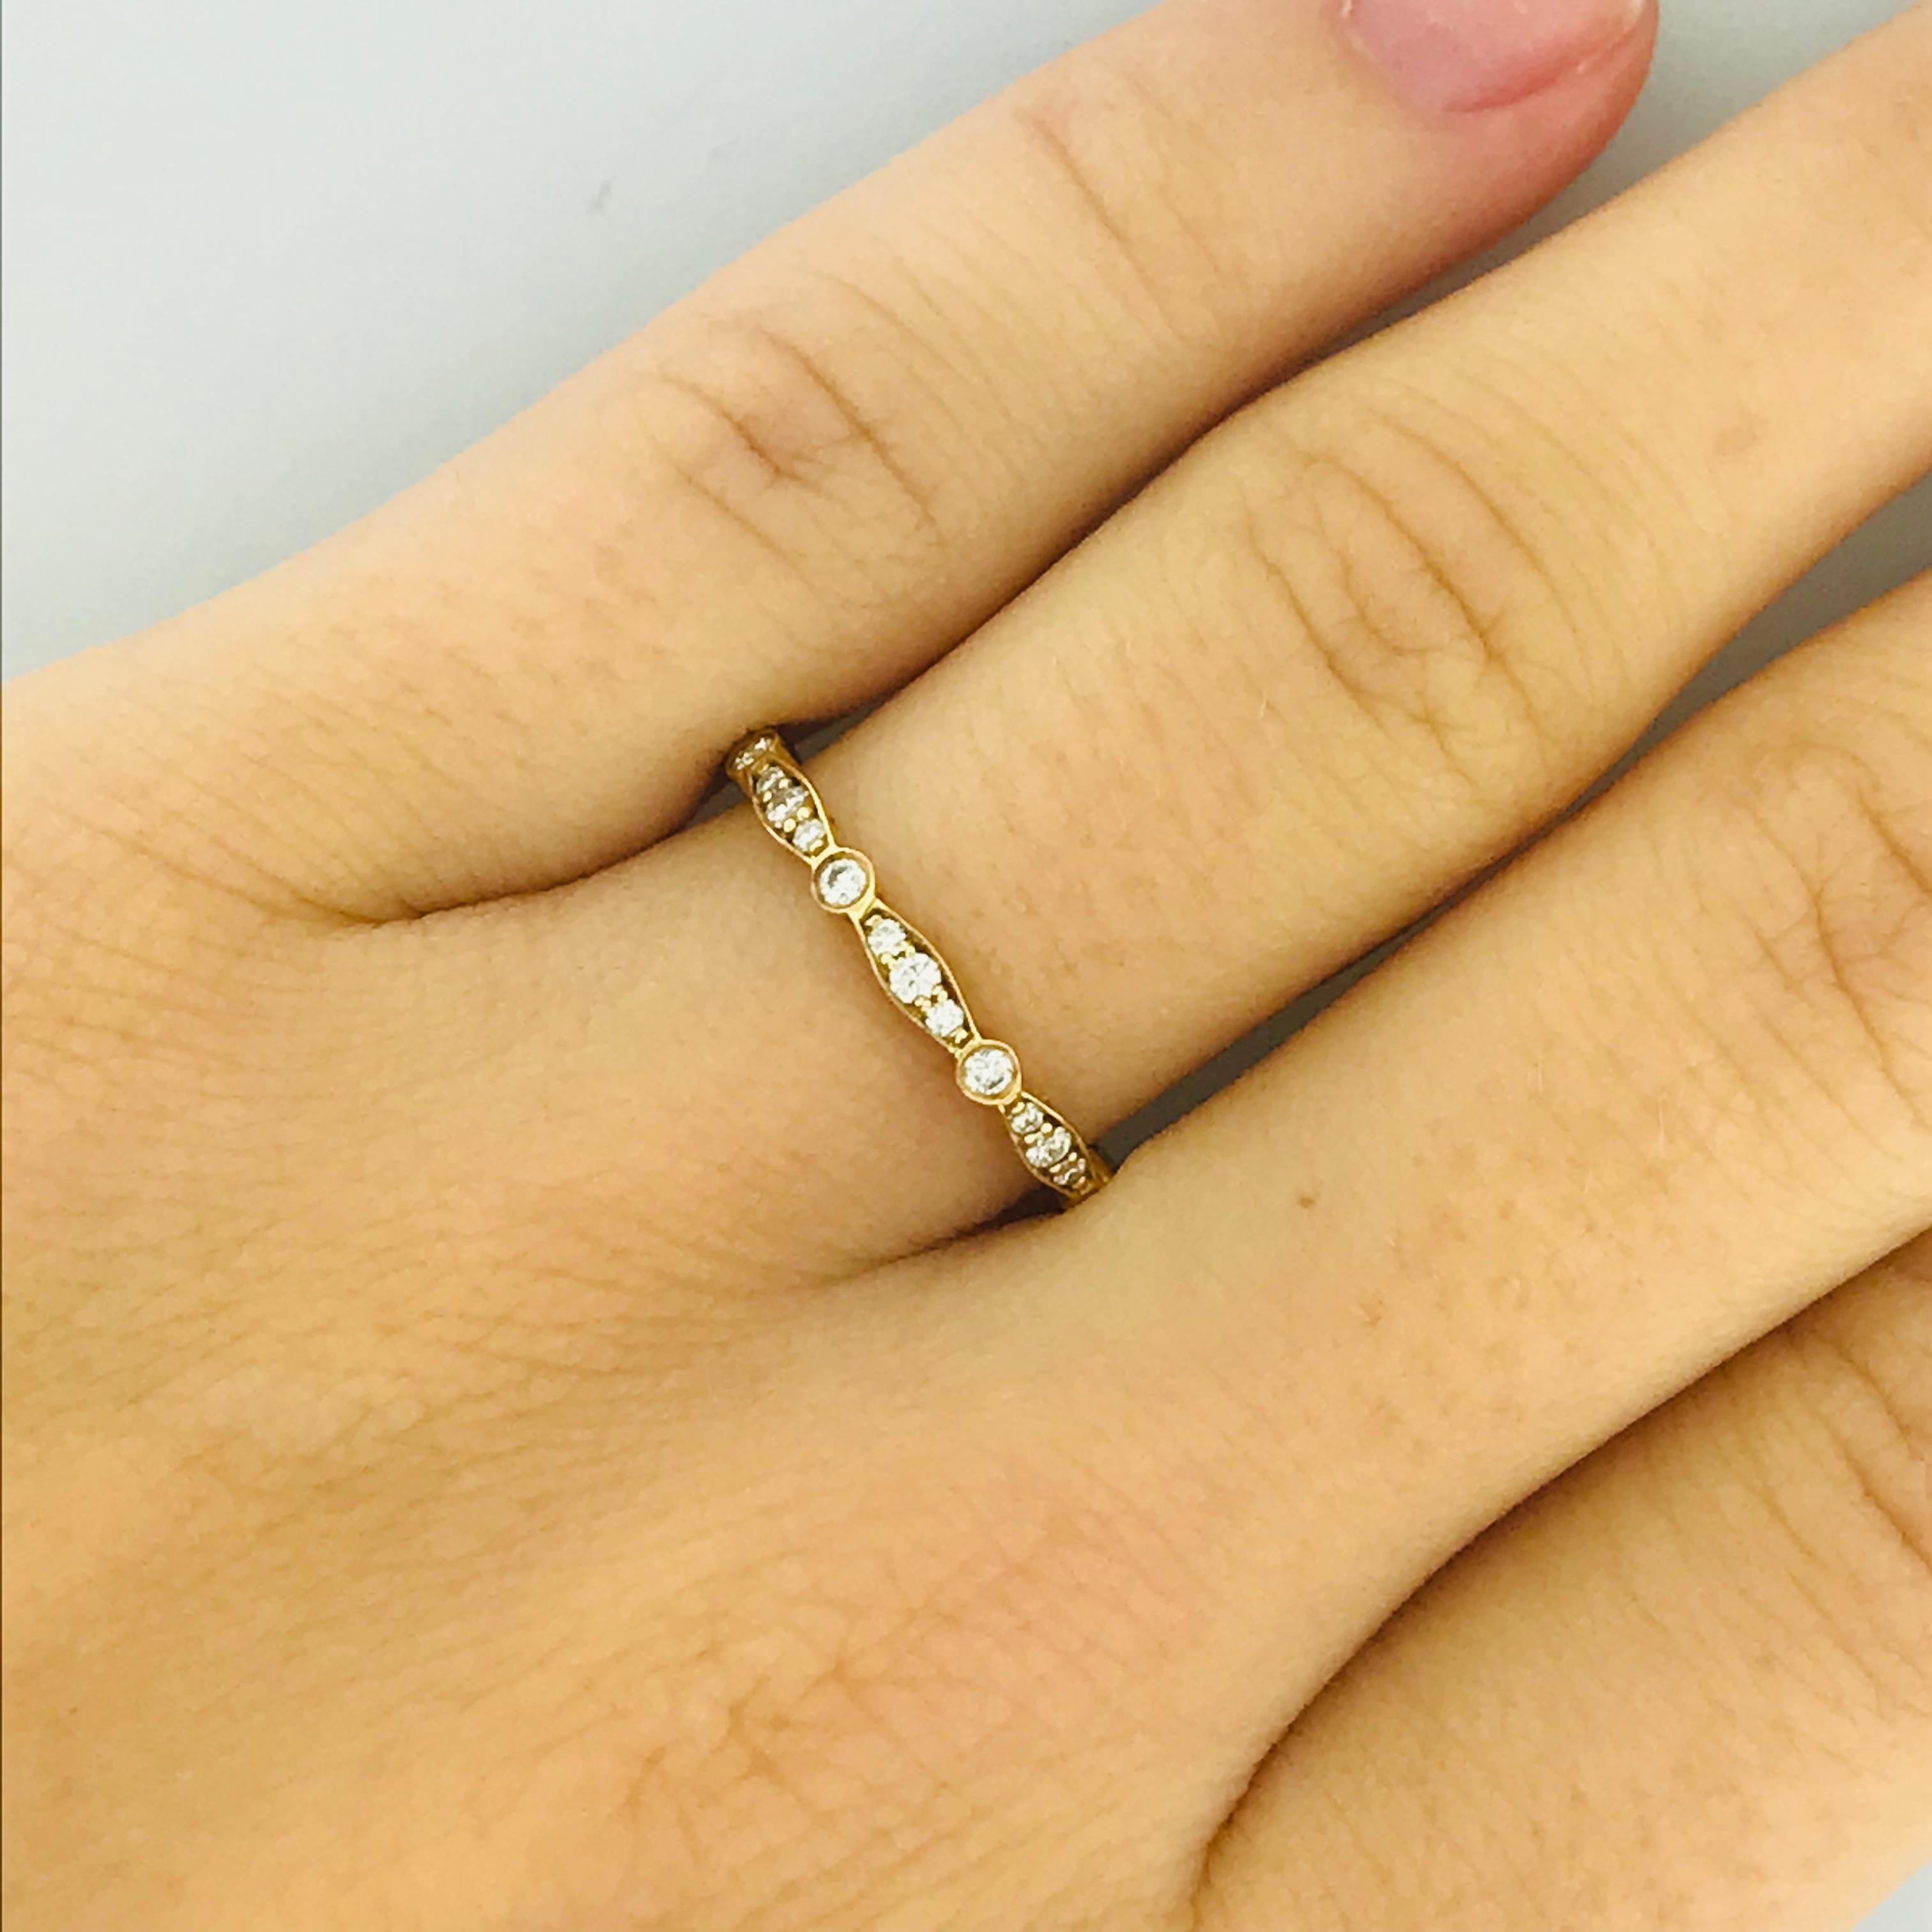 This original Tacori ring is an original Tacori diamond eternity band made with rich 18 karat yellow gold and bright white diamonds. The ring is new, never before worn and comes with the original Tacori box. This would make the most fun stackable